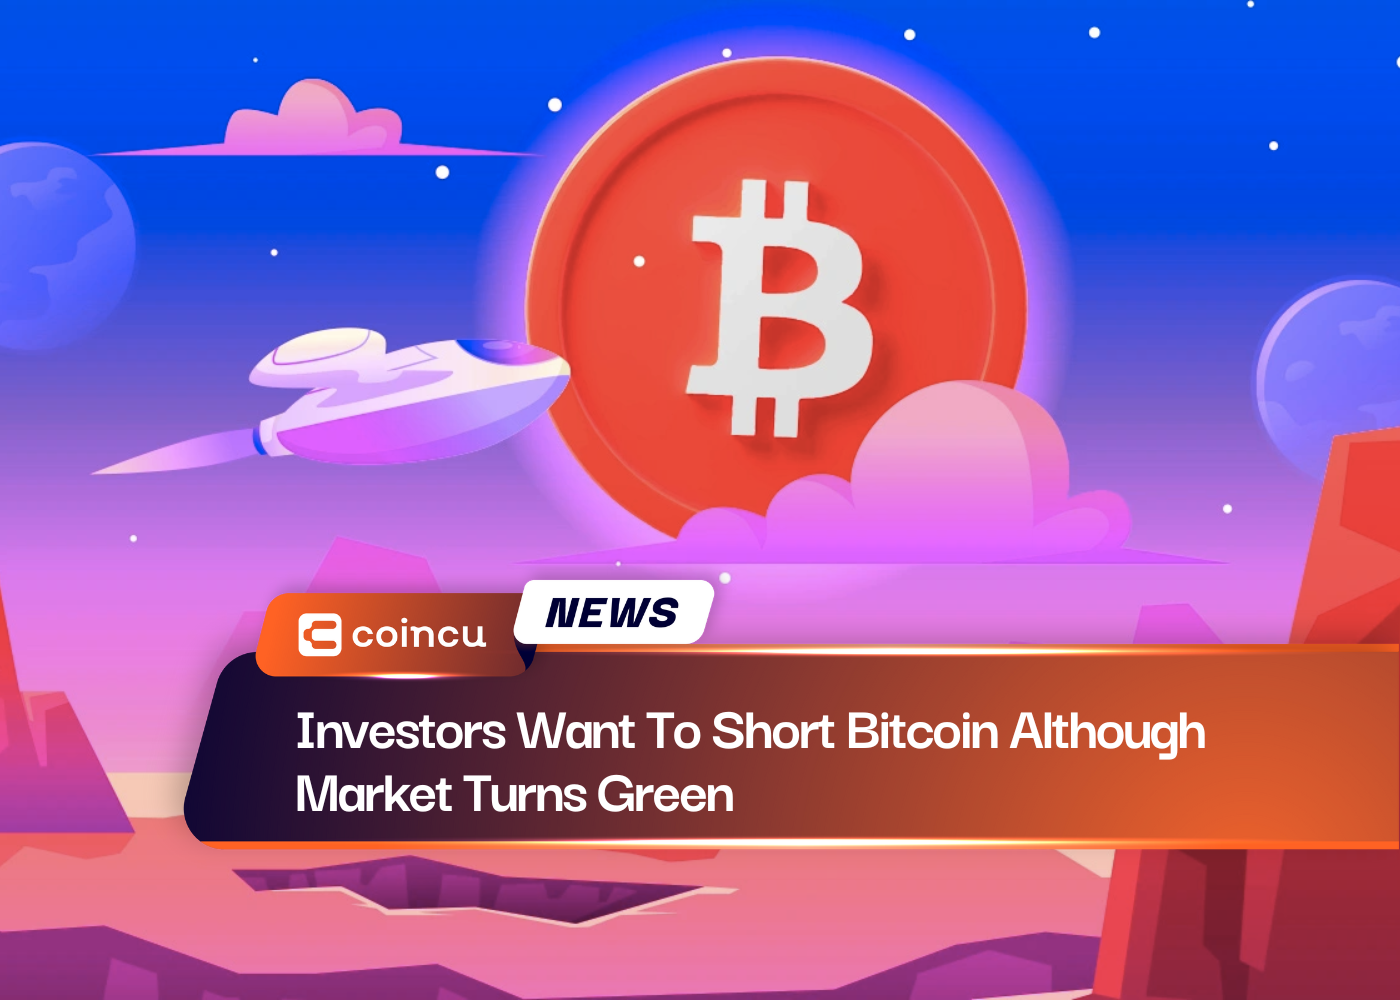 Investors Want To Short Bitcoin Although Market Turns Green